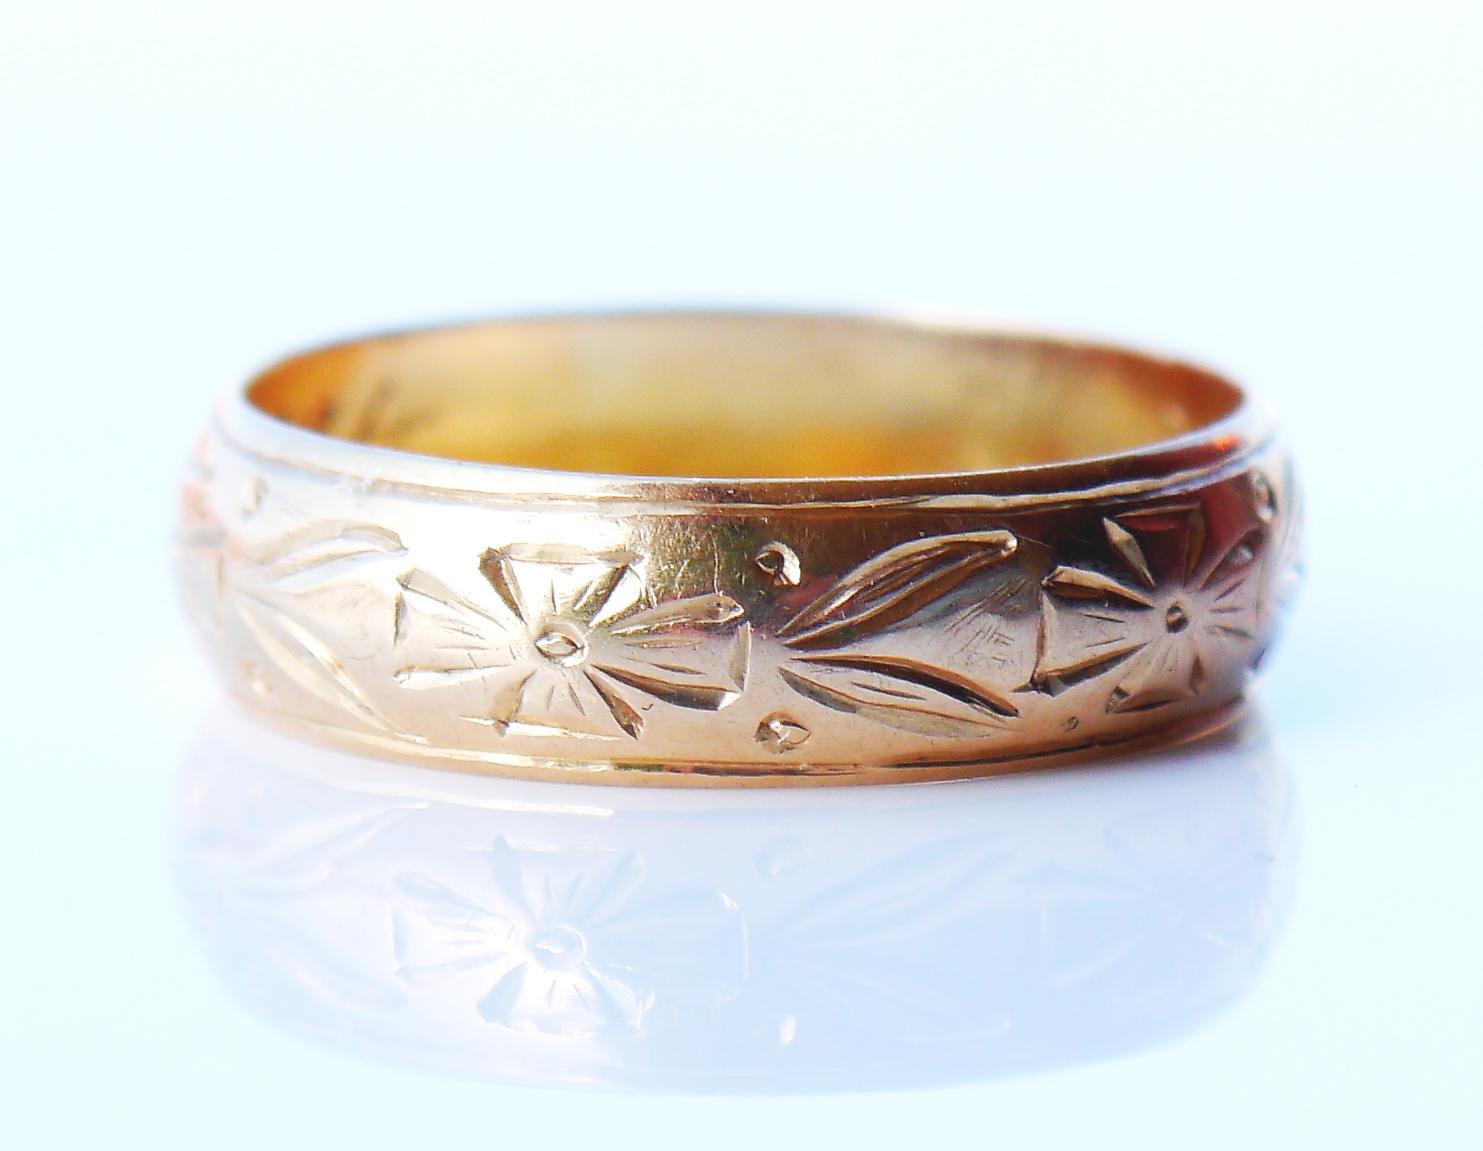 Fine 18K Antique Rose Gold Wedding Ring .

Engraved cross/flowers ornament around the shank.

Made in Sweden. Workshop of M.B Sten ,city of Halmstad , hallmarked 18K.

Year mark: B7 / made in 1904 . Engraved Anna 21/5 1904.

Fine used condition.